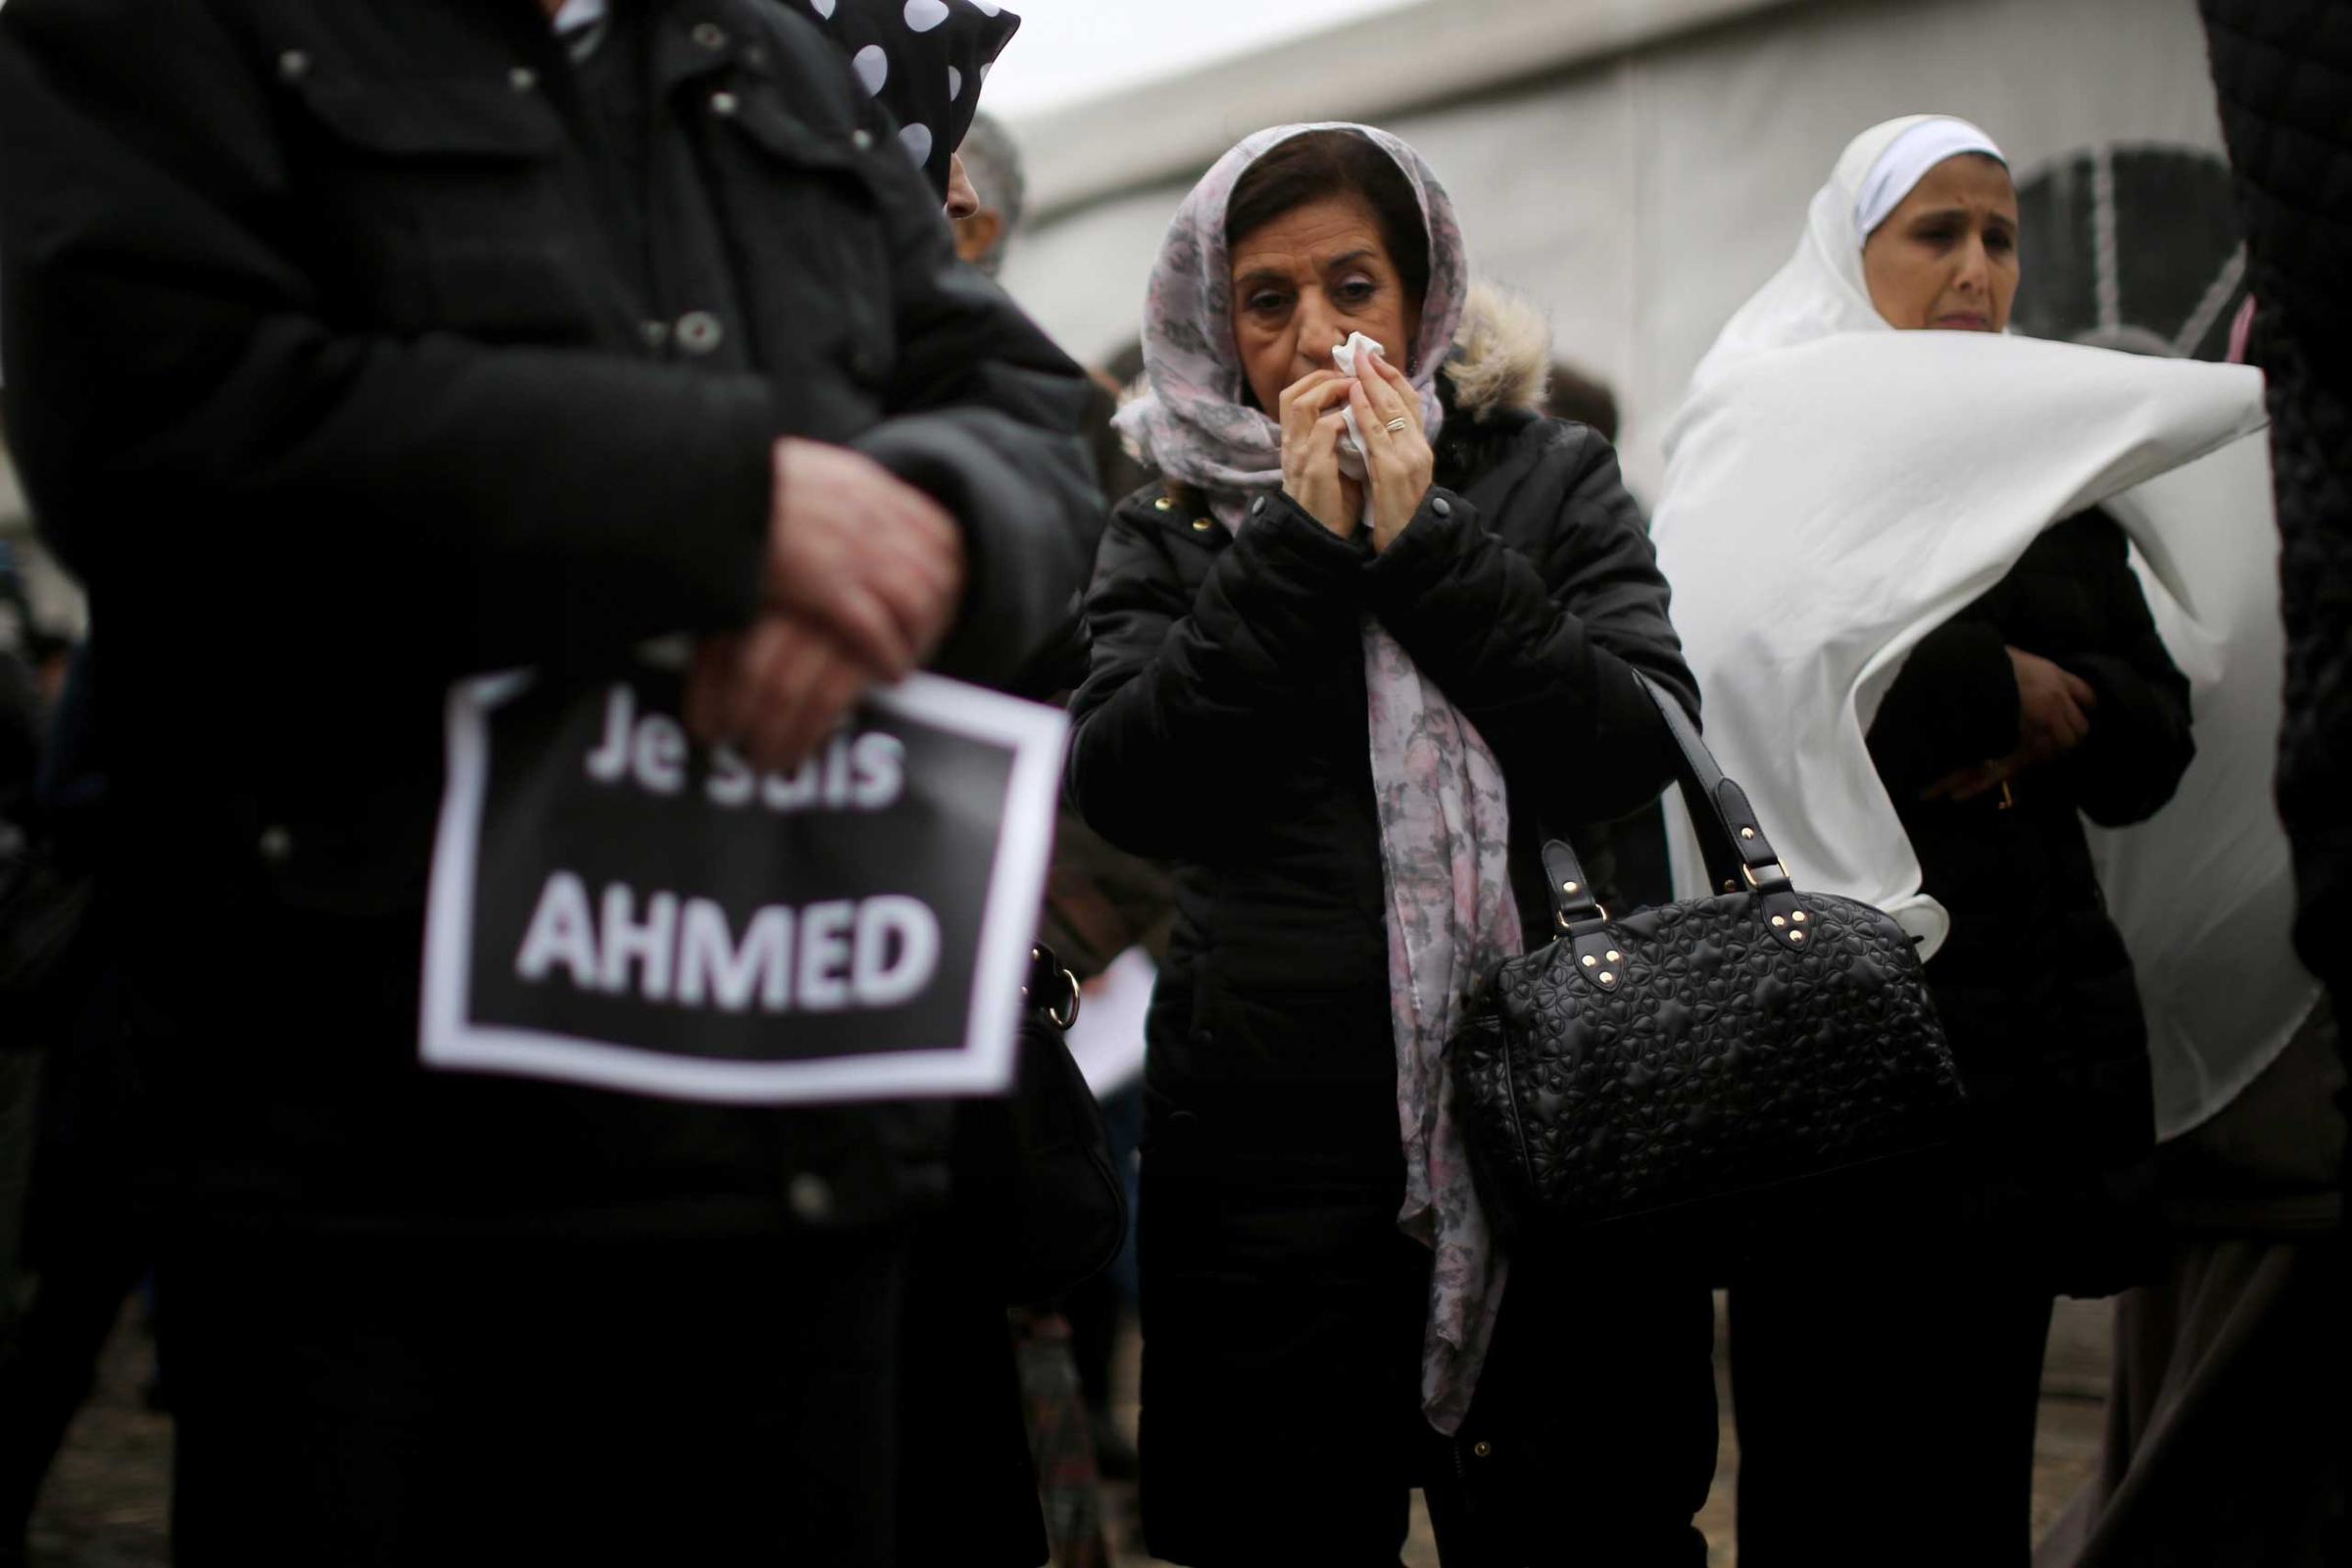 A female mourner reacts during the funeral of murdered police officer Ahmed Merabet at Bobigny Muslim cemetery on Jan. 13, 2015 in Bobigny, France.